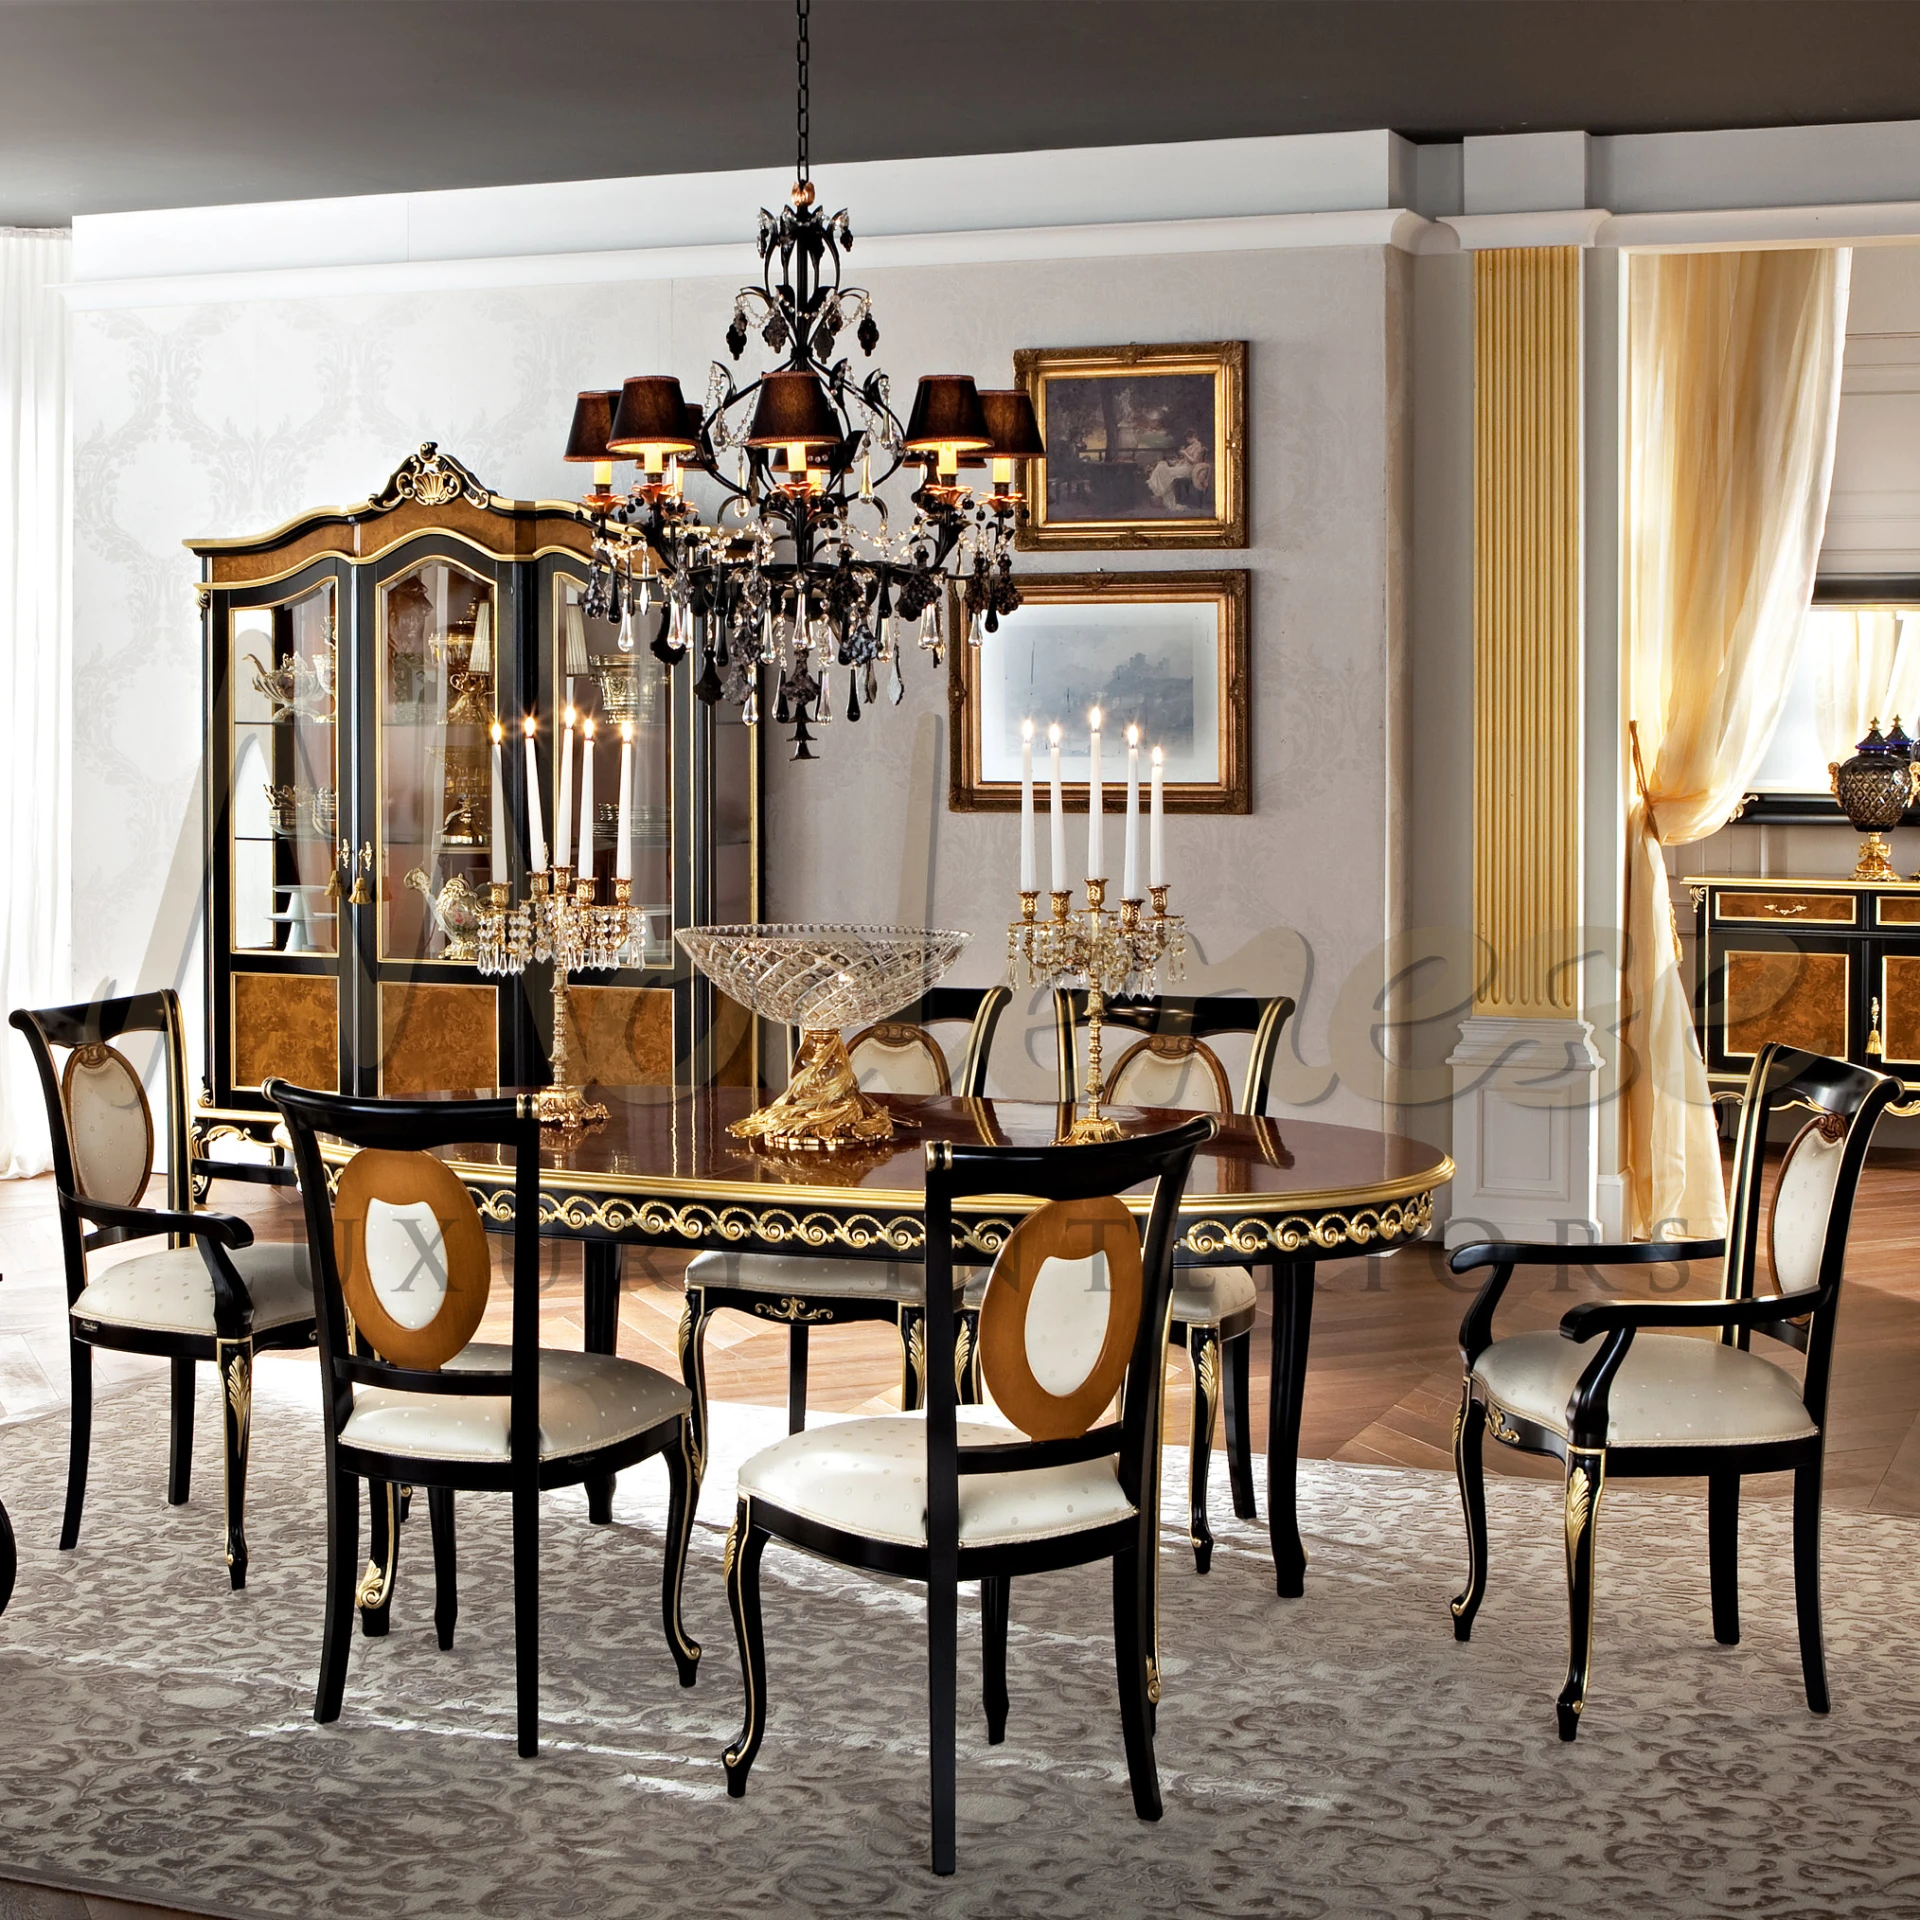 Luxurious handcrafted dining table with intricate golden details. Customizable fabric and frame options.